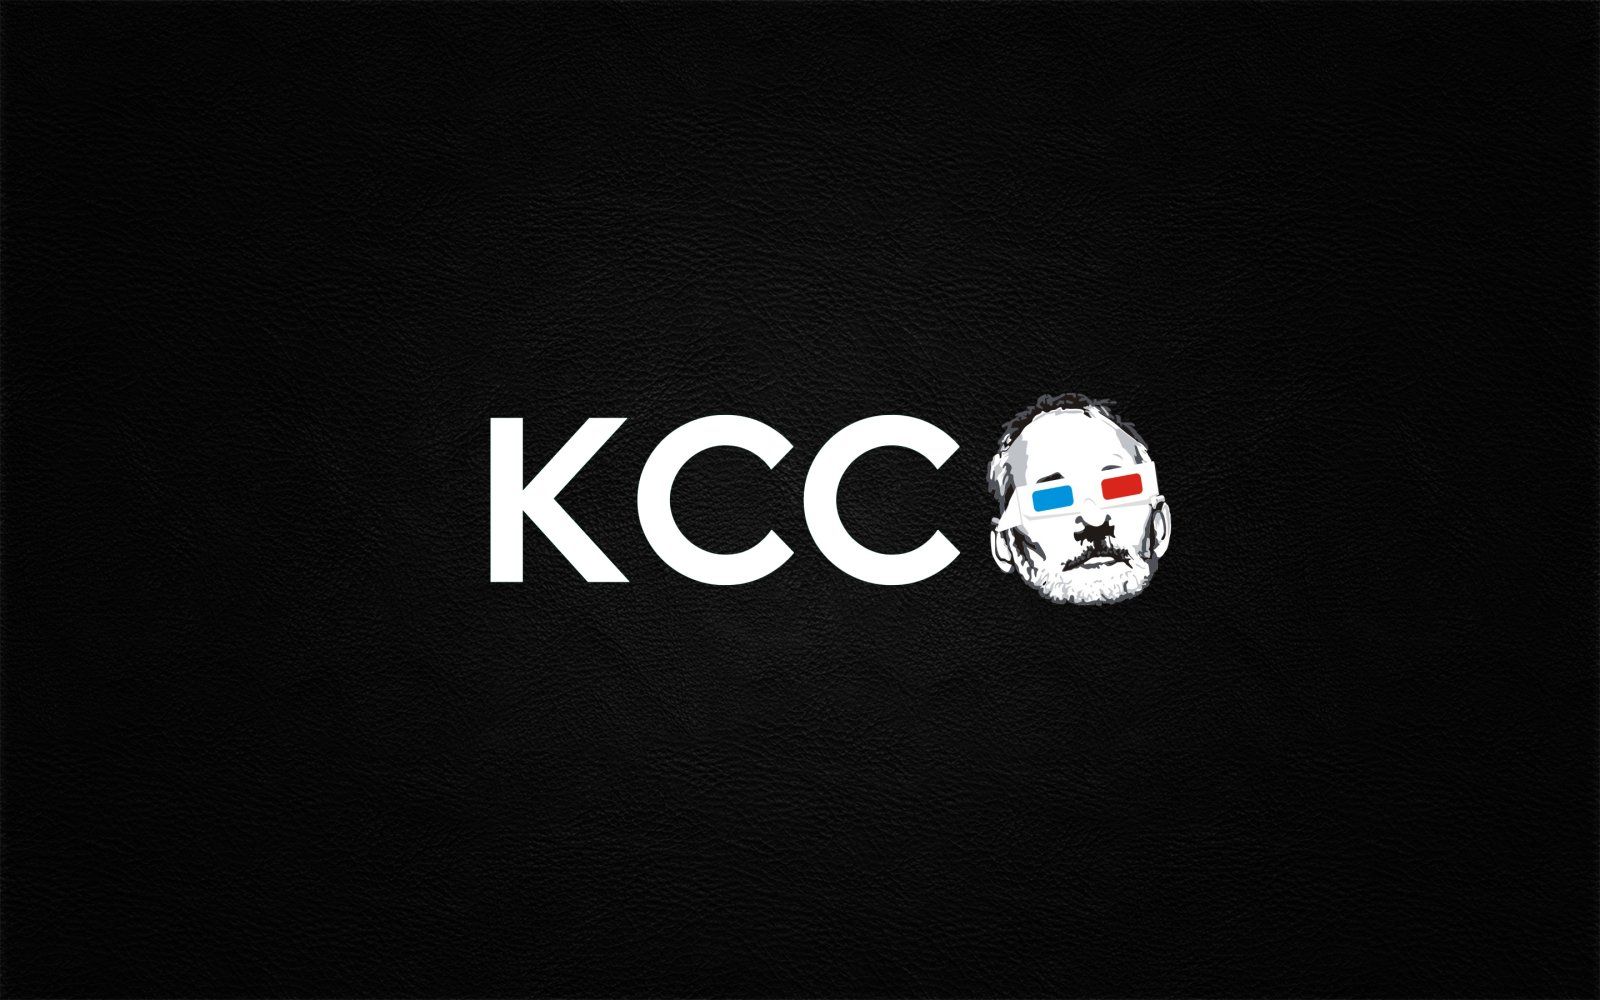 The Chive Wallpapers